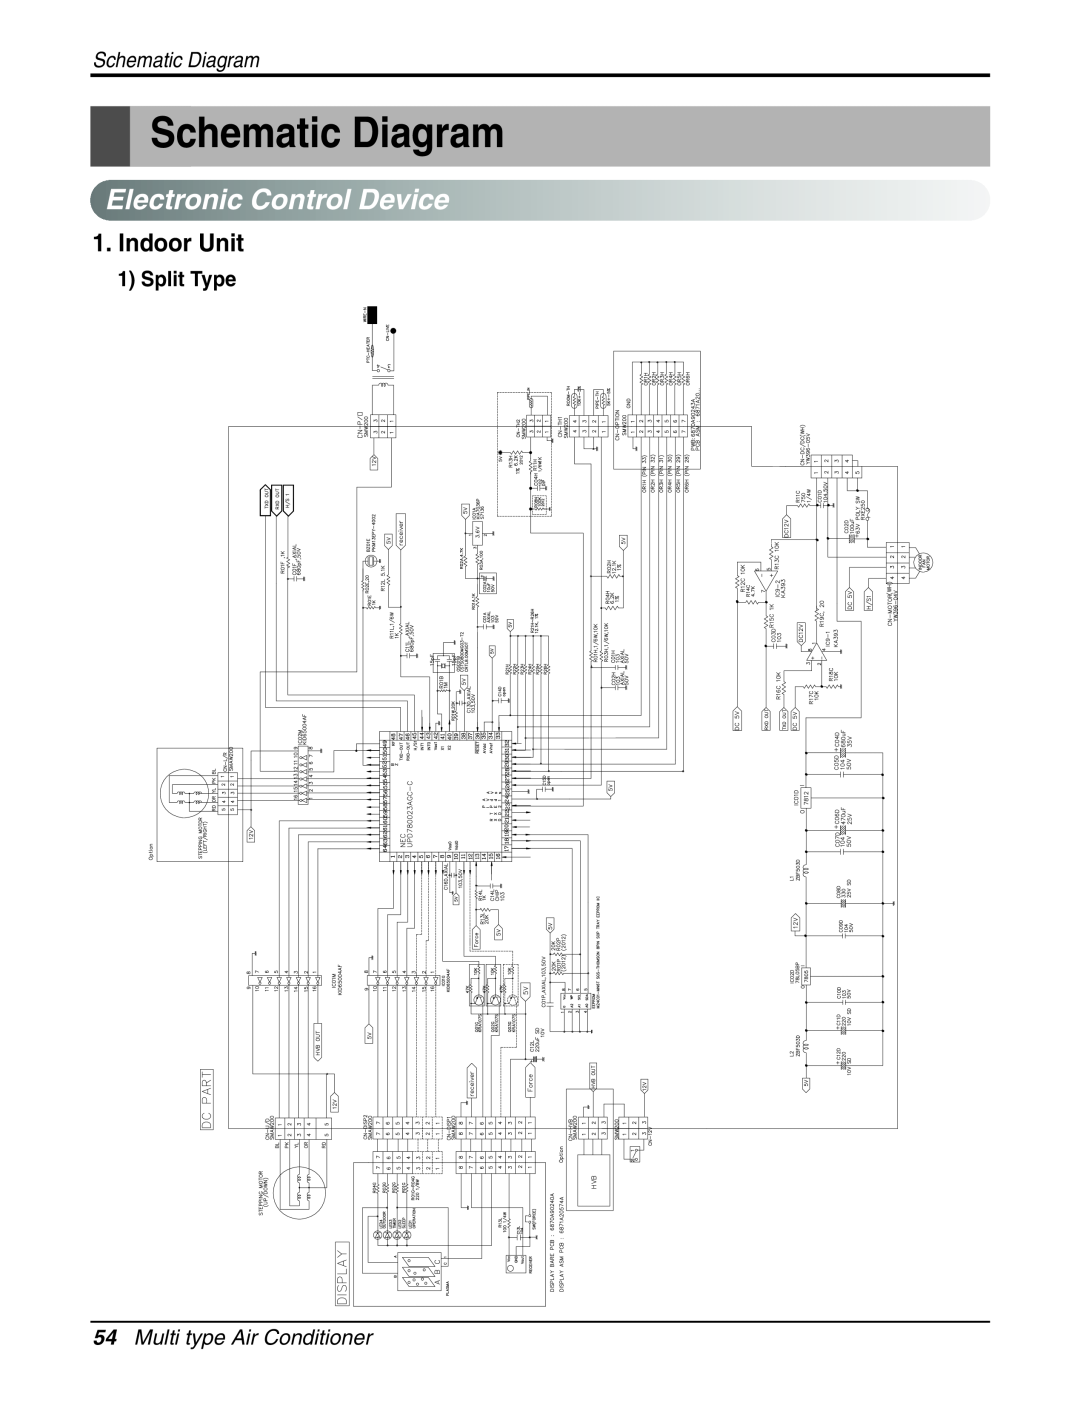 LG Electronics A2UH243FA0(LMU240HE) service manual Schematic Diagram, ElectronicControlDevice, Indoor Unit, Split Type 